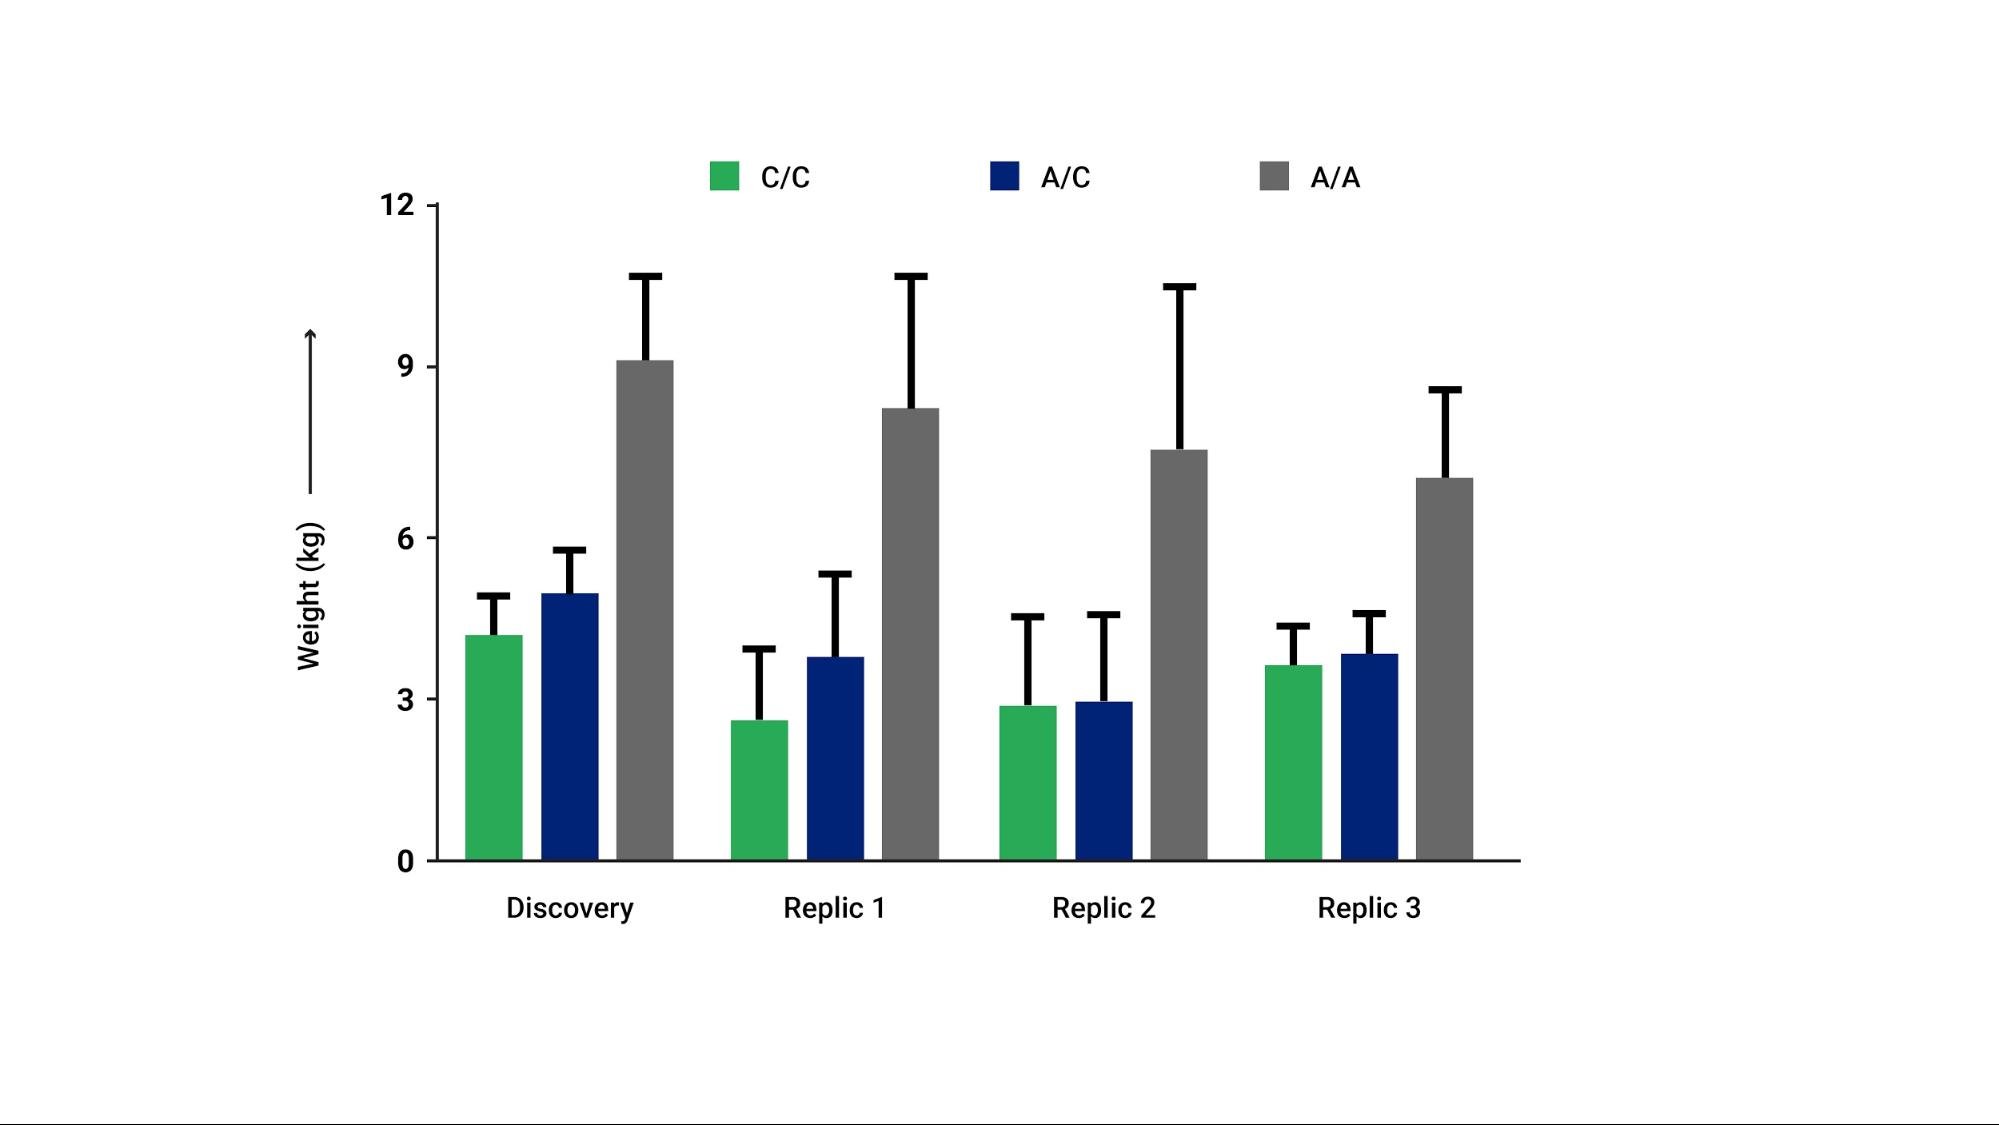 Figure 3 data compares the amount of weight gained on atypical antipsychotics by MC4R genotype.